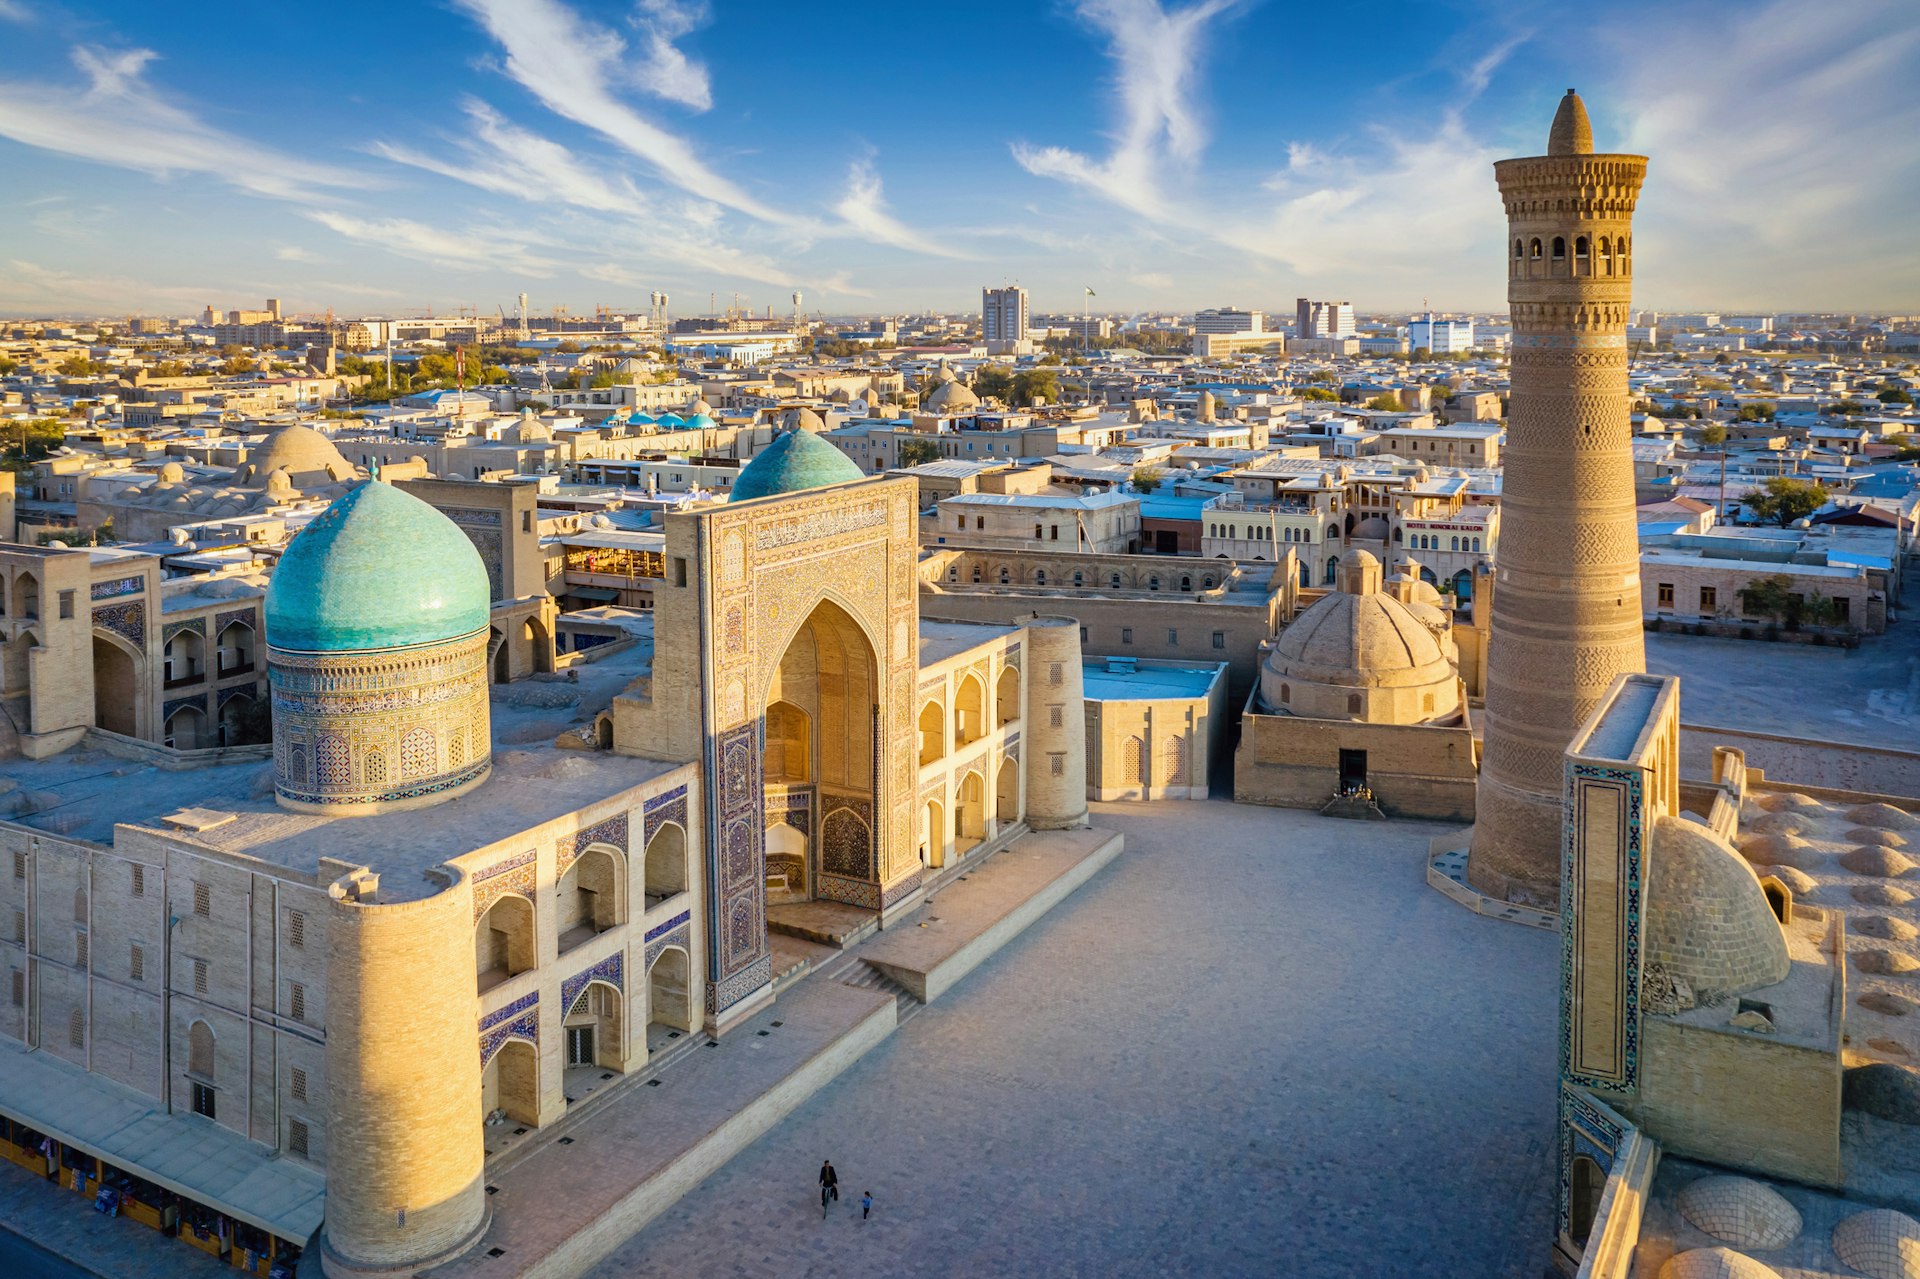 A complex of mosque buildings with two blue tiled domes and a tall minaret